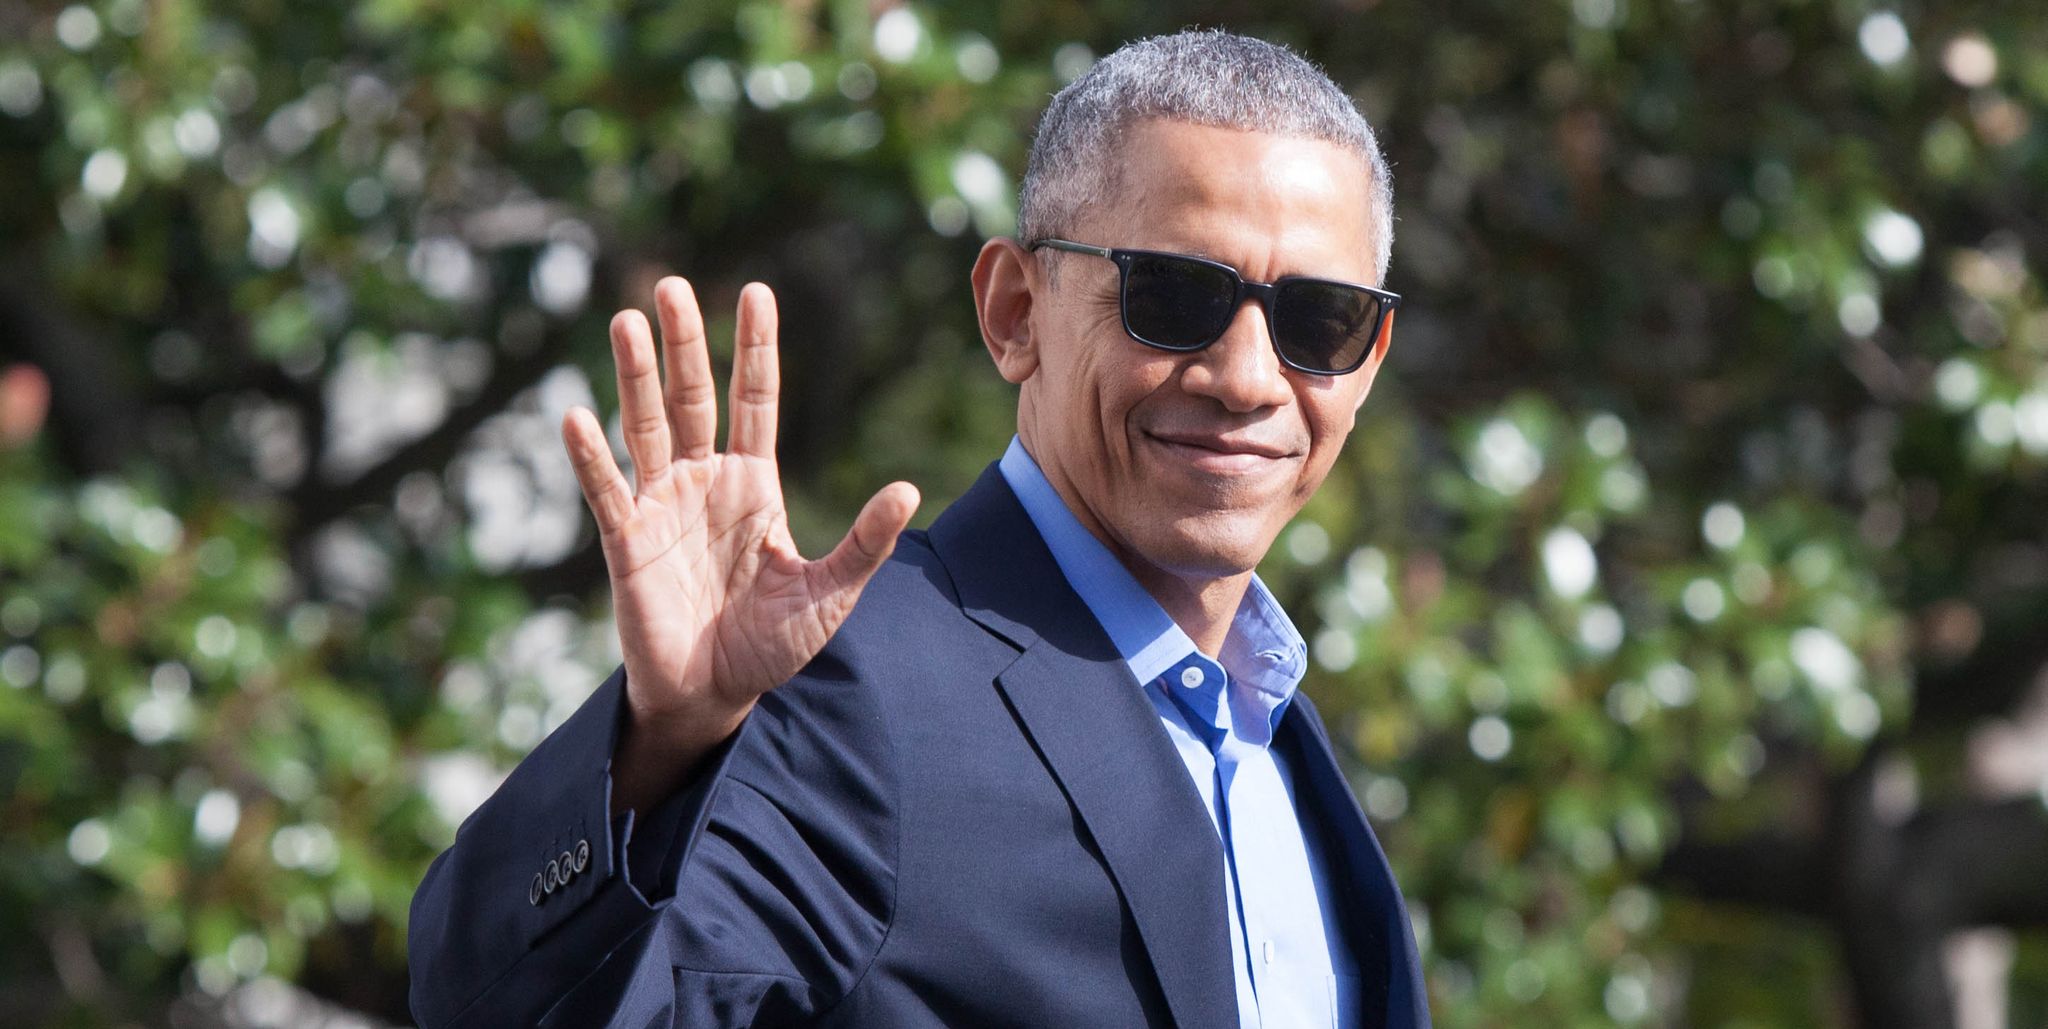 President Obama Departs White House En Route To Florida To Campaign For Hillary Clinton